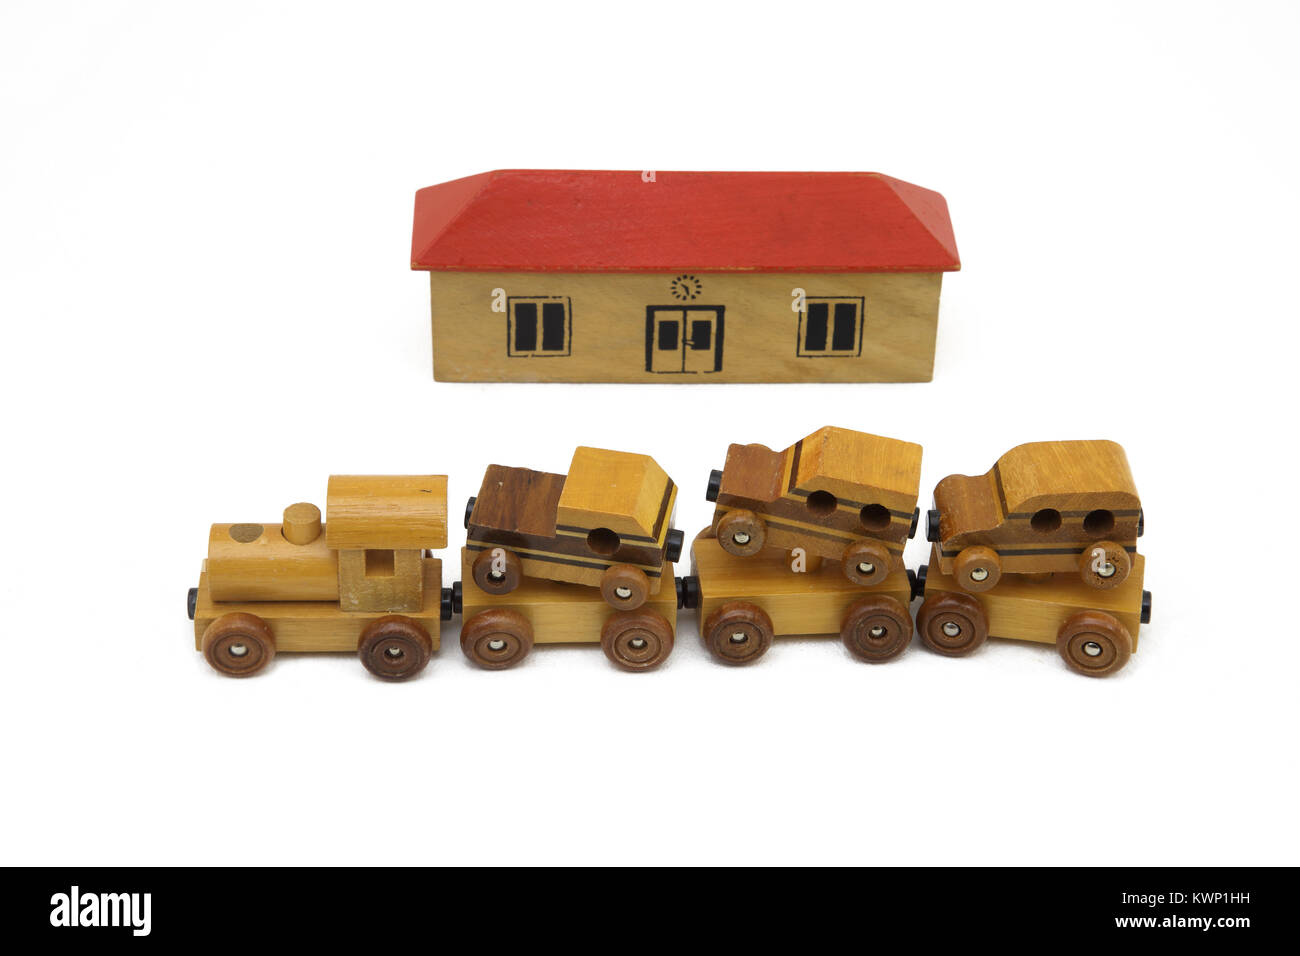 Handmade Wooden Magnetic Train Set With Station Stock Photo